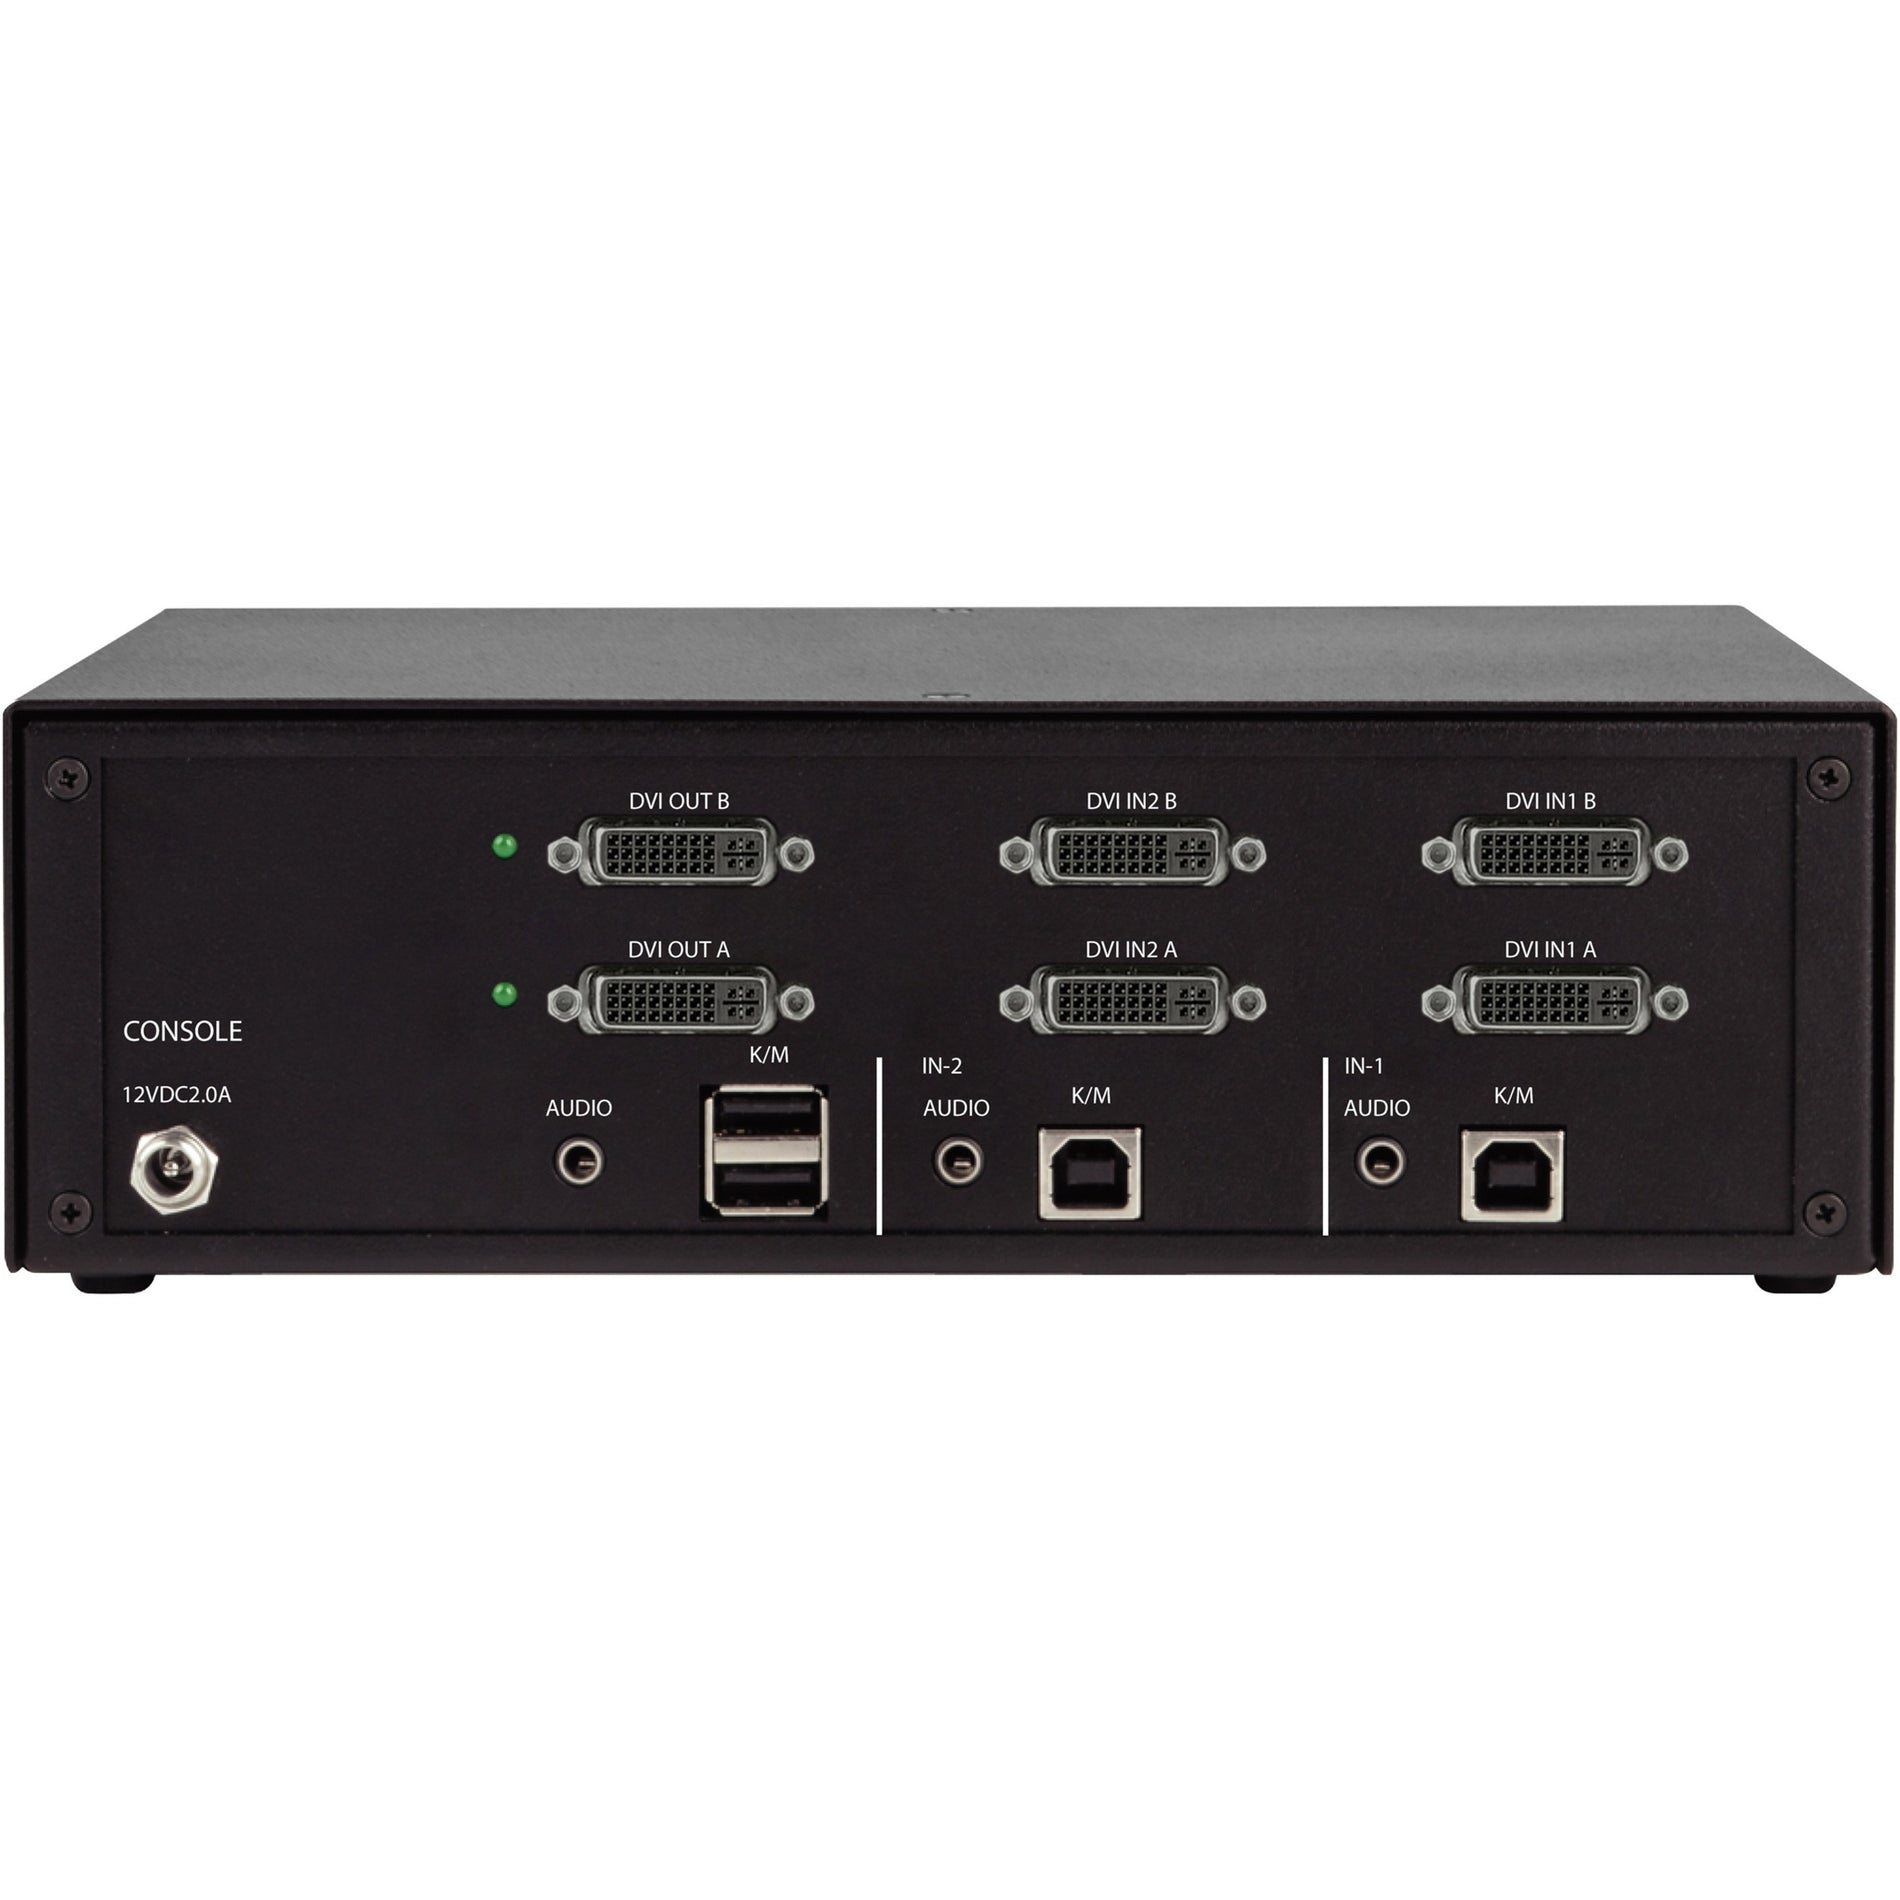 Black Box KVS4-2002D Secure KVM Switch - DVI-I, 2 Computers Supported, 2 Local Users Supported